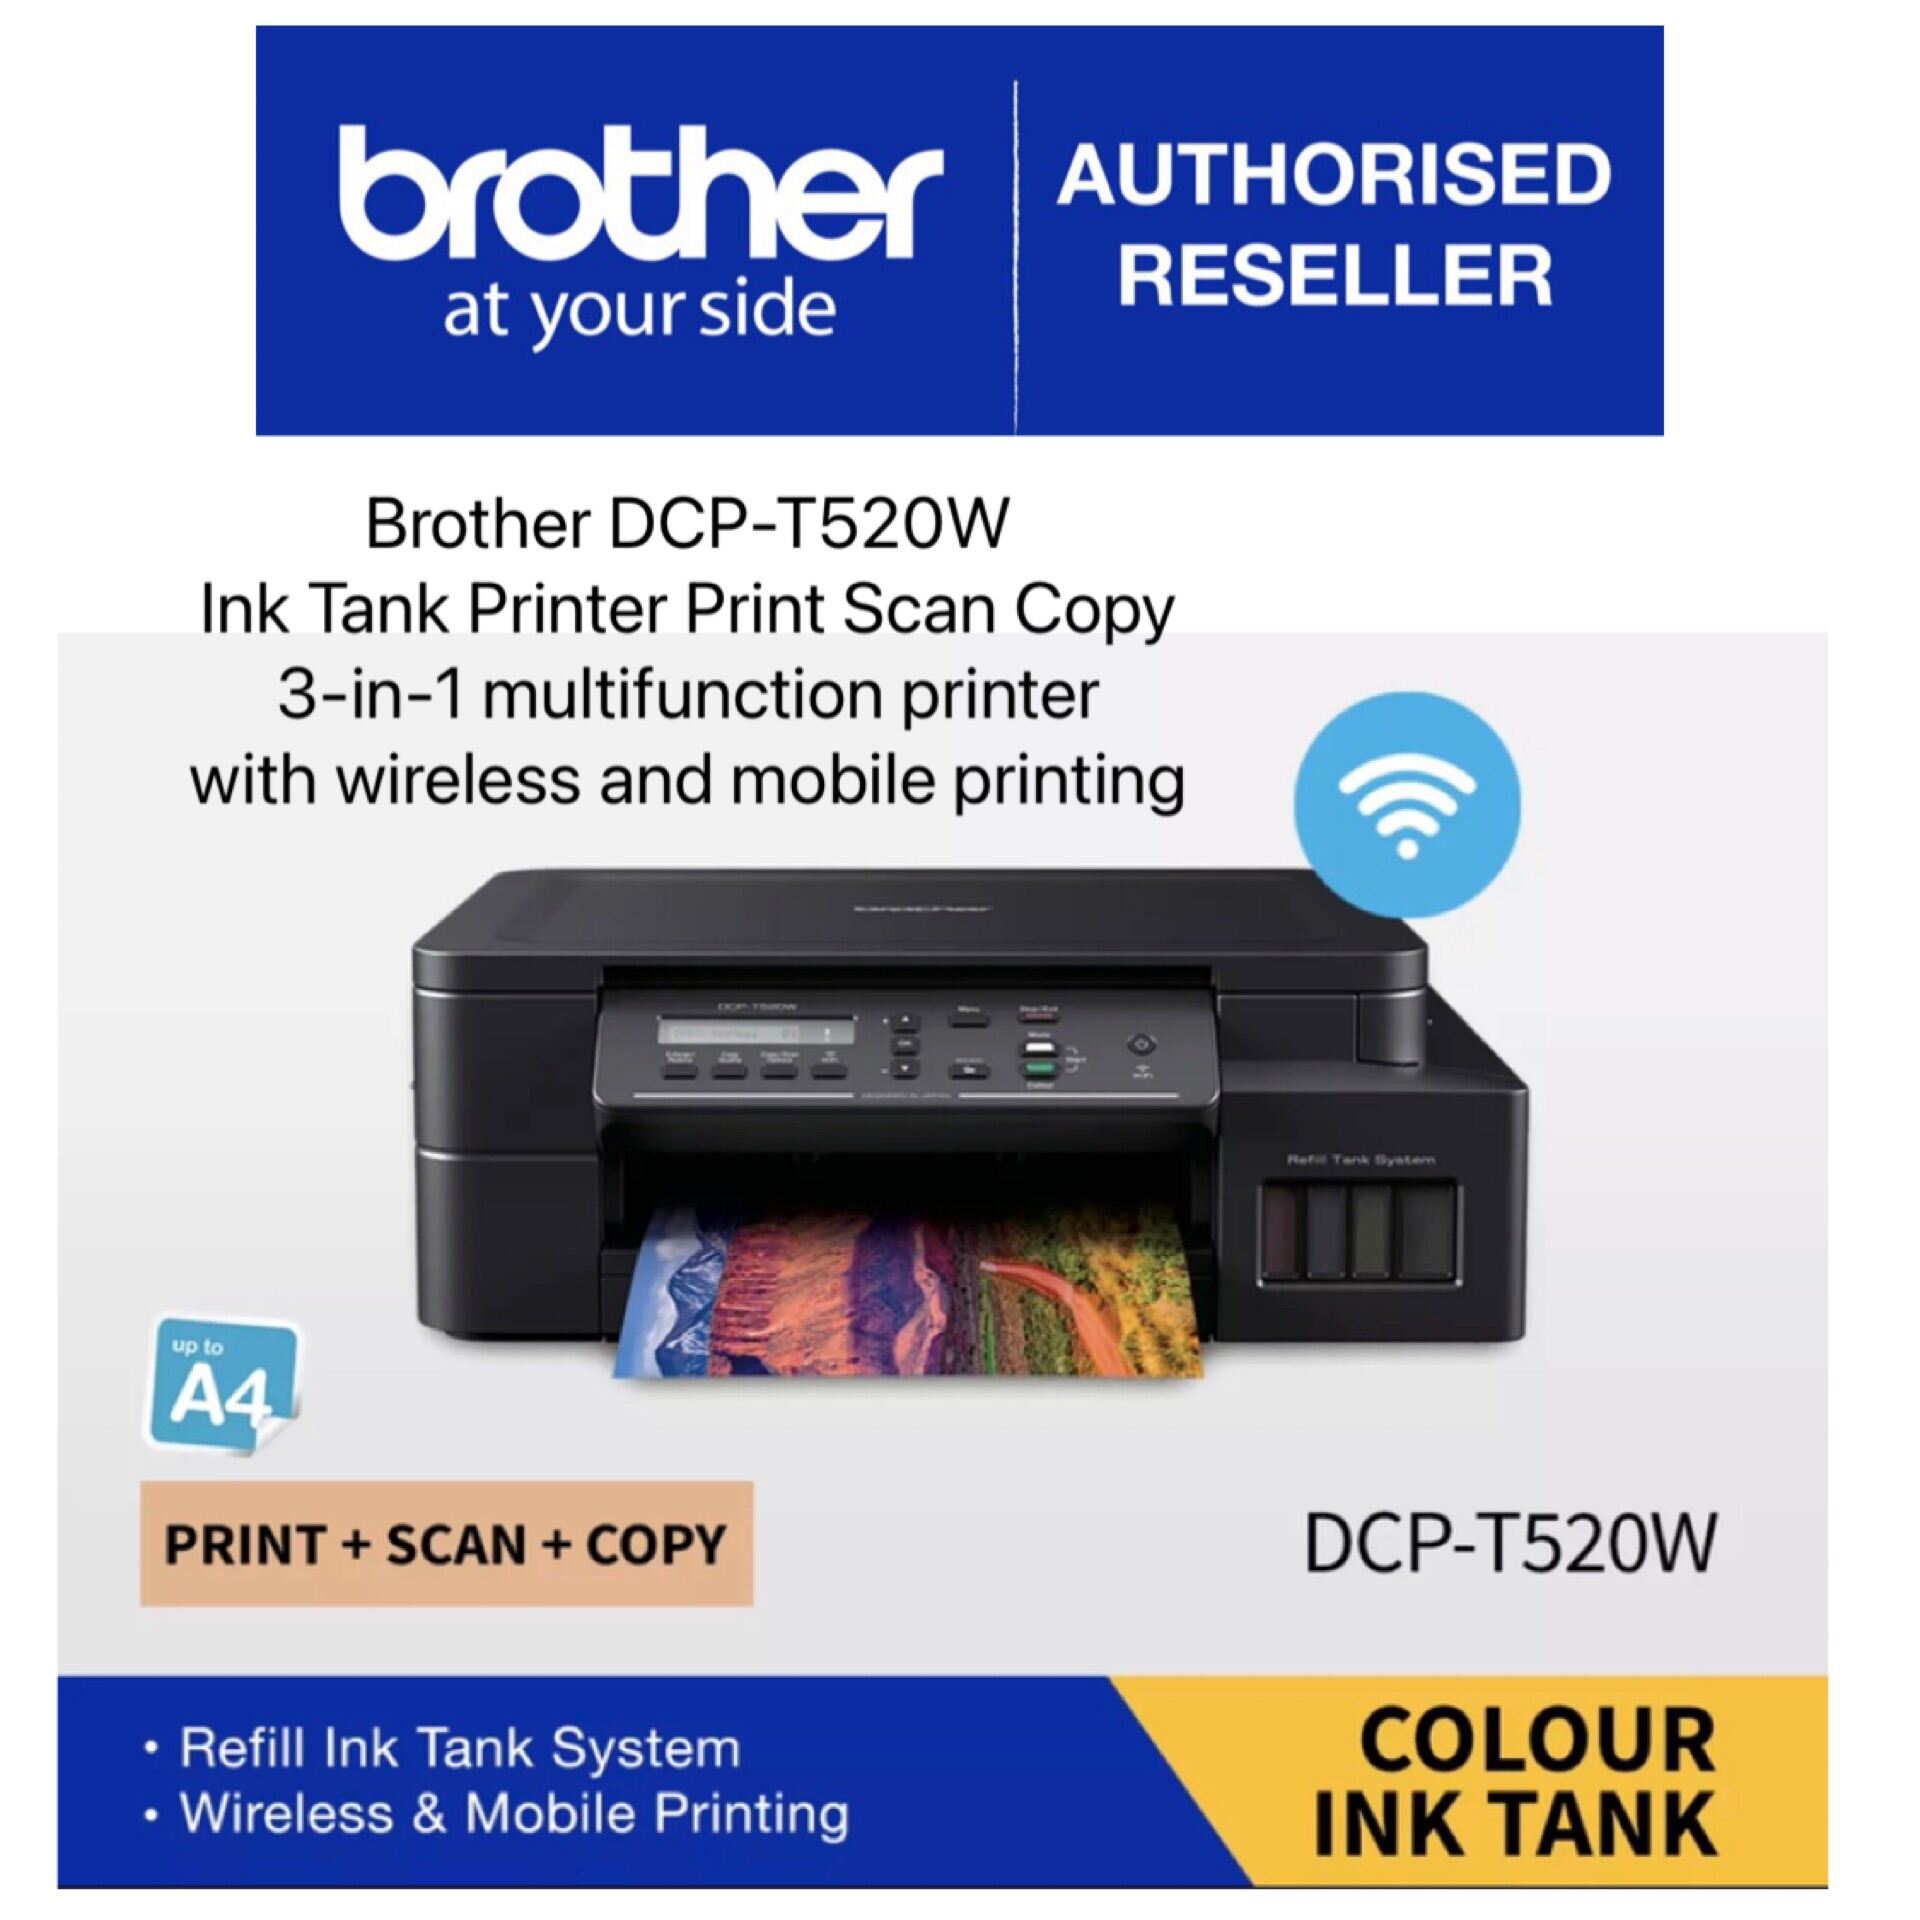 Brother DCP-T520W Ink Tank Printer 3-in-1  Print | Scan | Copy • Wireless printing • Mobile printing Singapore